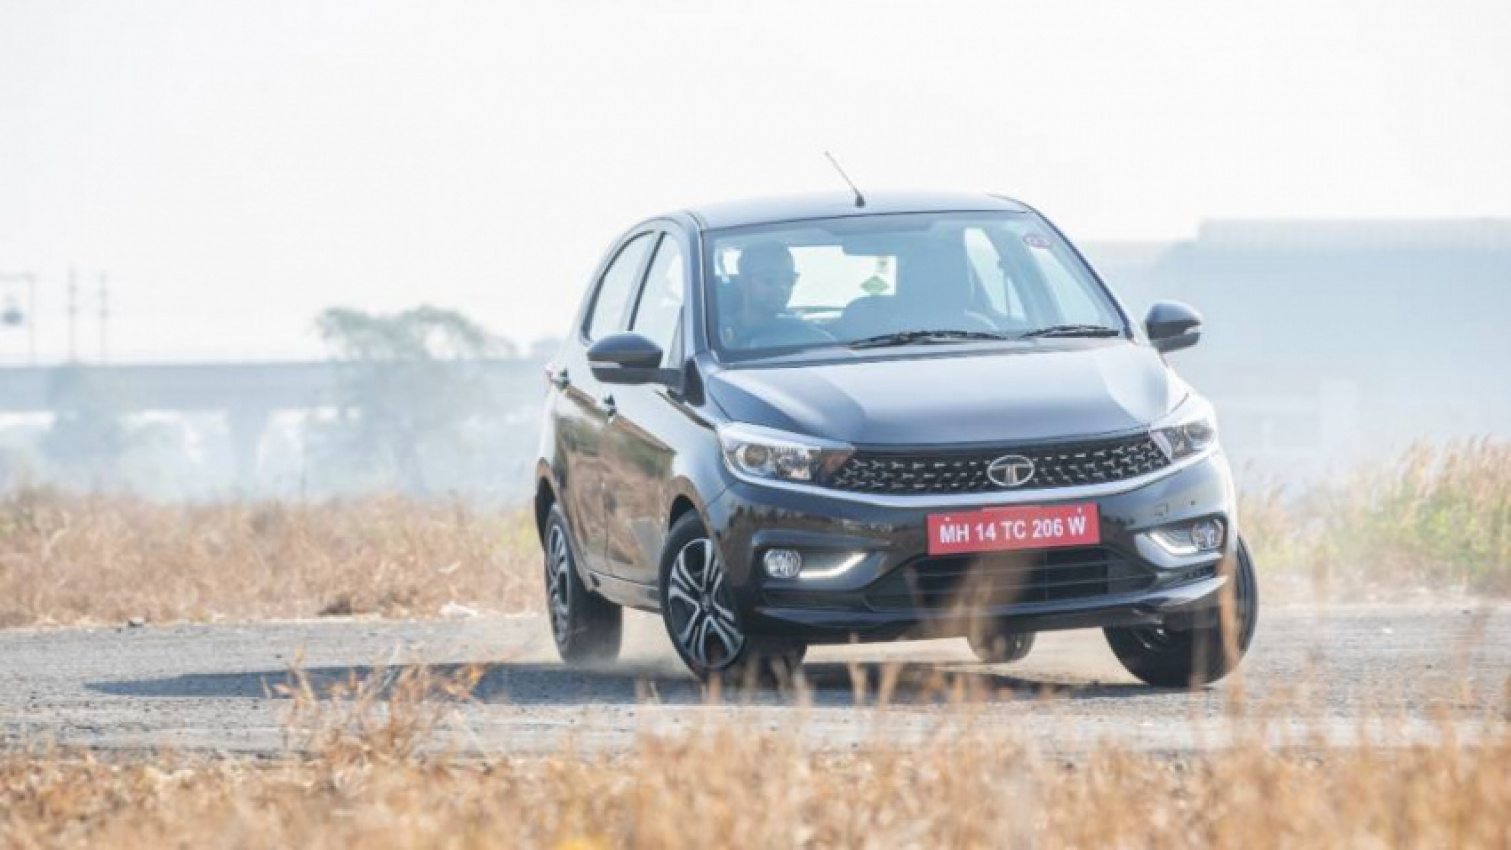 autos, cars, reviews, 2022 tata tiago icng, cng car reviews, overdrive, tata tiago cng overdrive, tata tiago cog road test review, tiago cng performance, tiago cng review, tiago icng, tiago icng review, 2022 tata tiago icng road test review